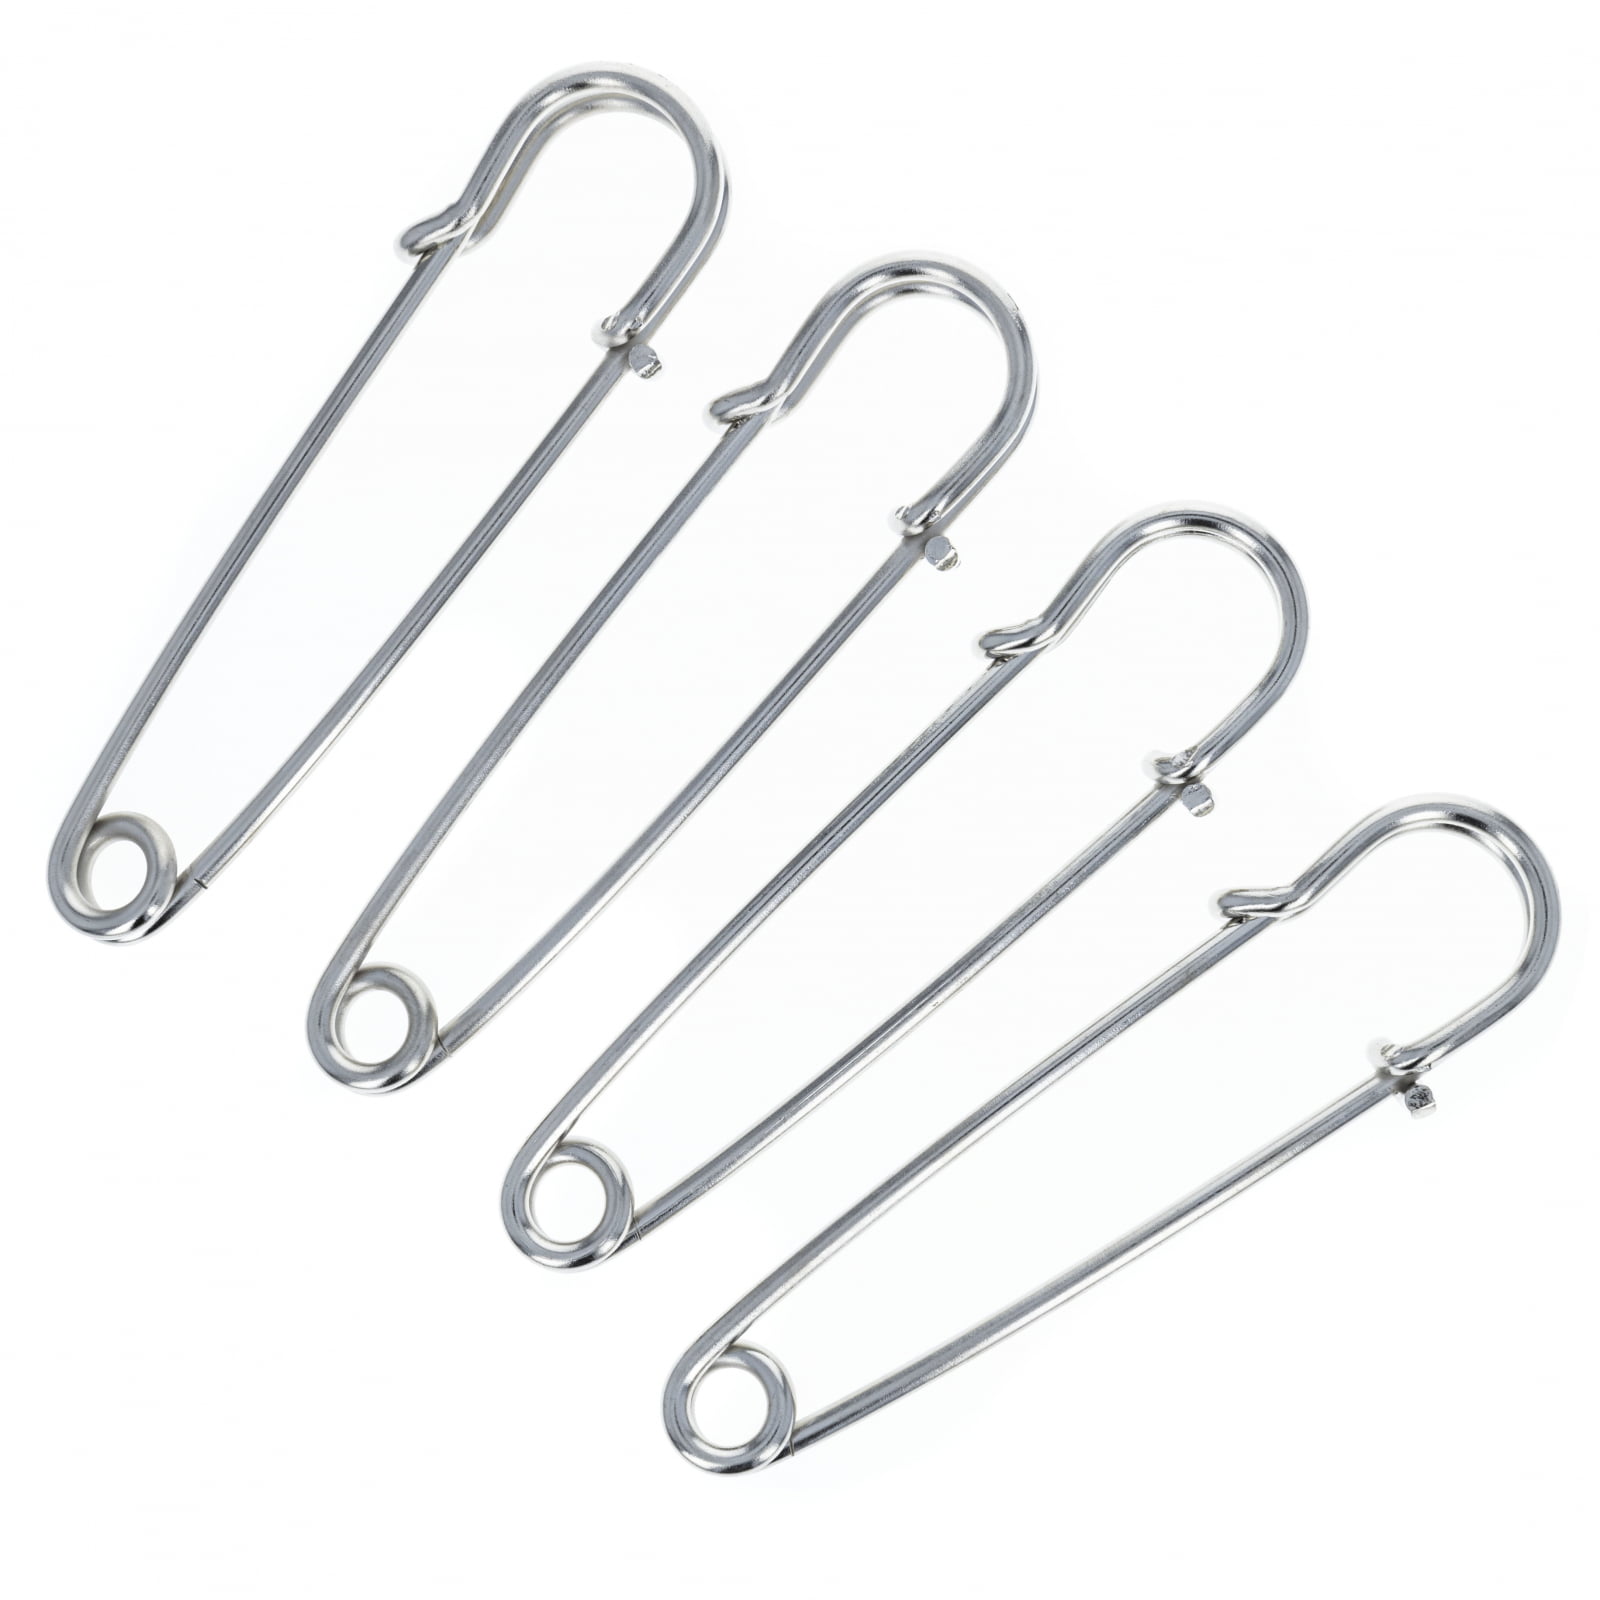 20 Pieces 4 Inch Large Safety Pins Heavy Duty Safety Pins Stainless Steel Large Safety Pins for Diaper Blankets Mattress Covers Backpacks Kilts Black